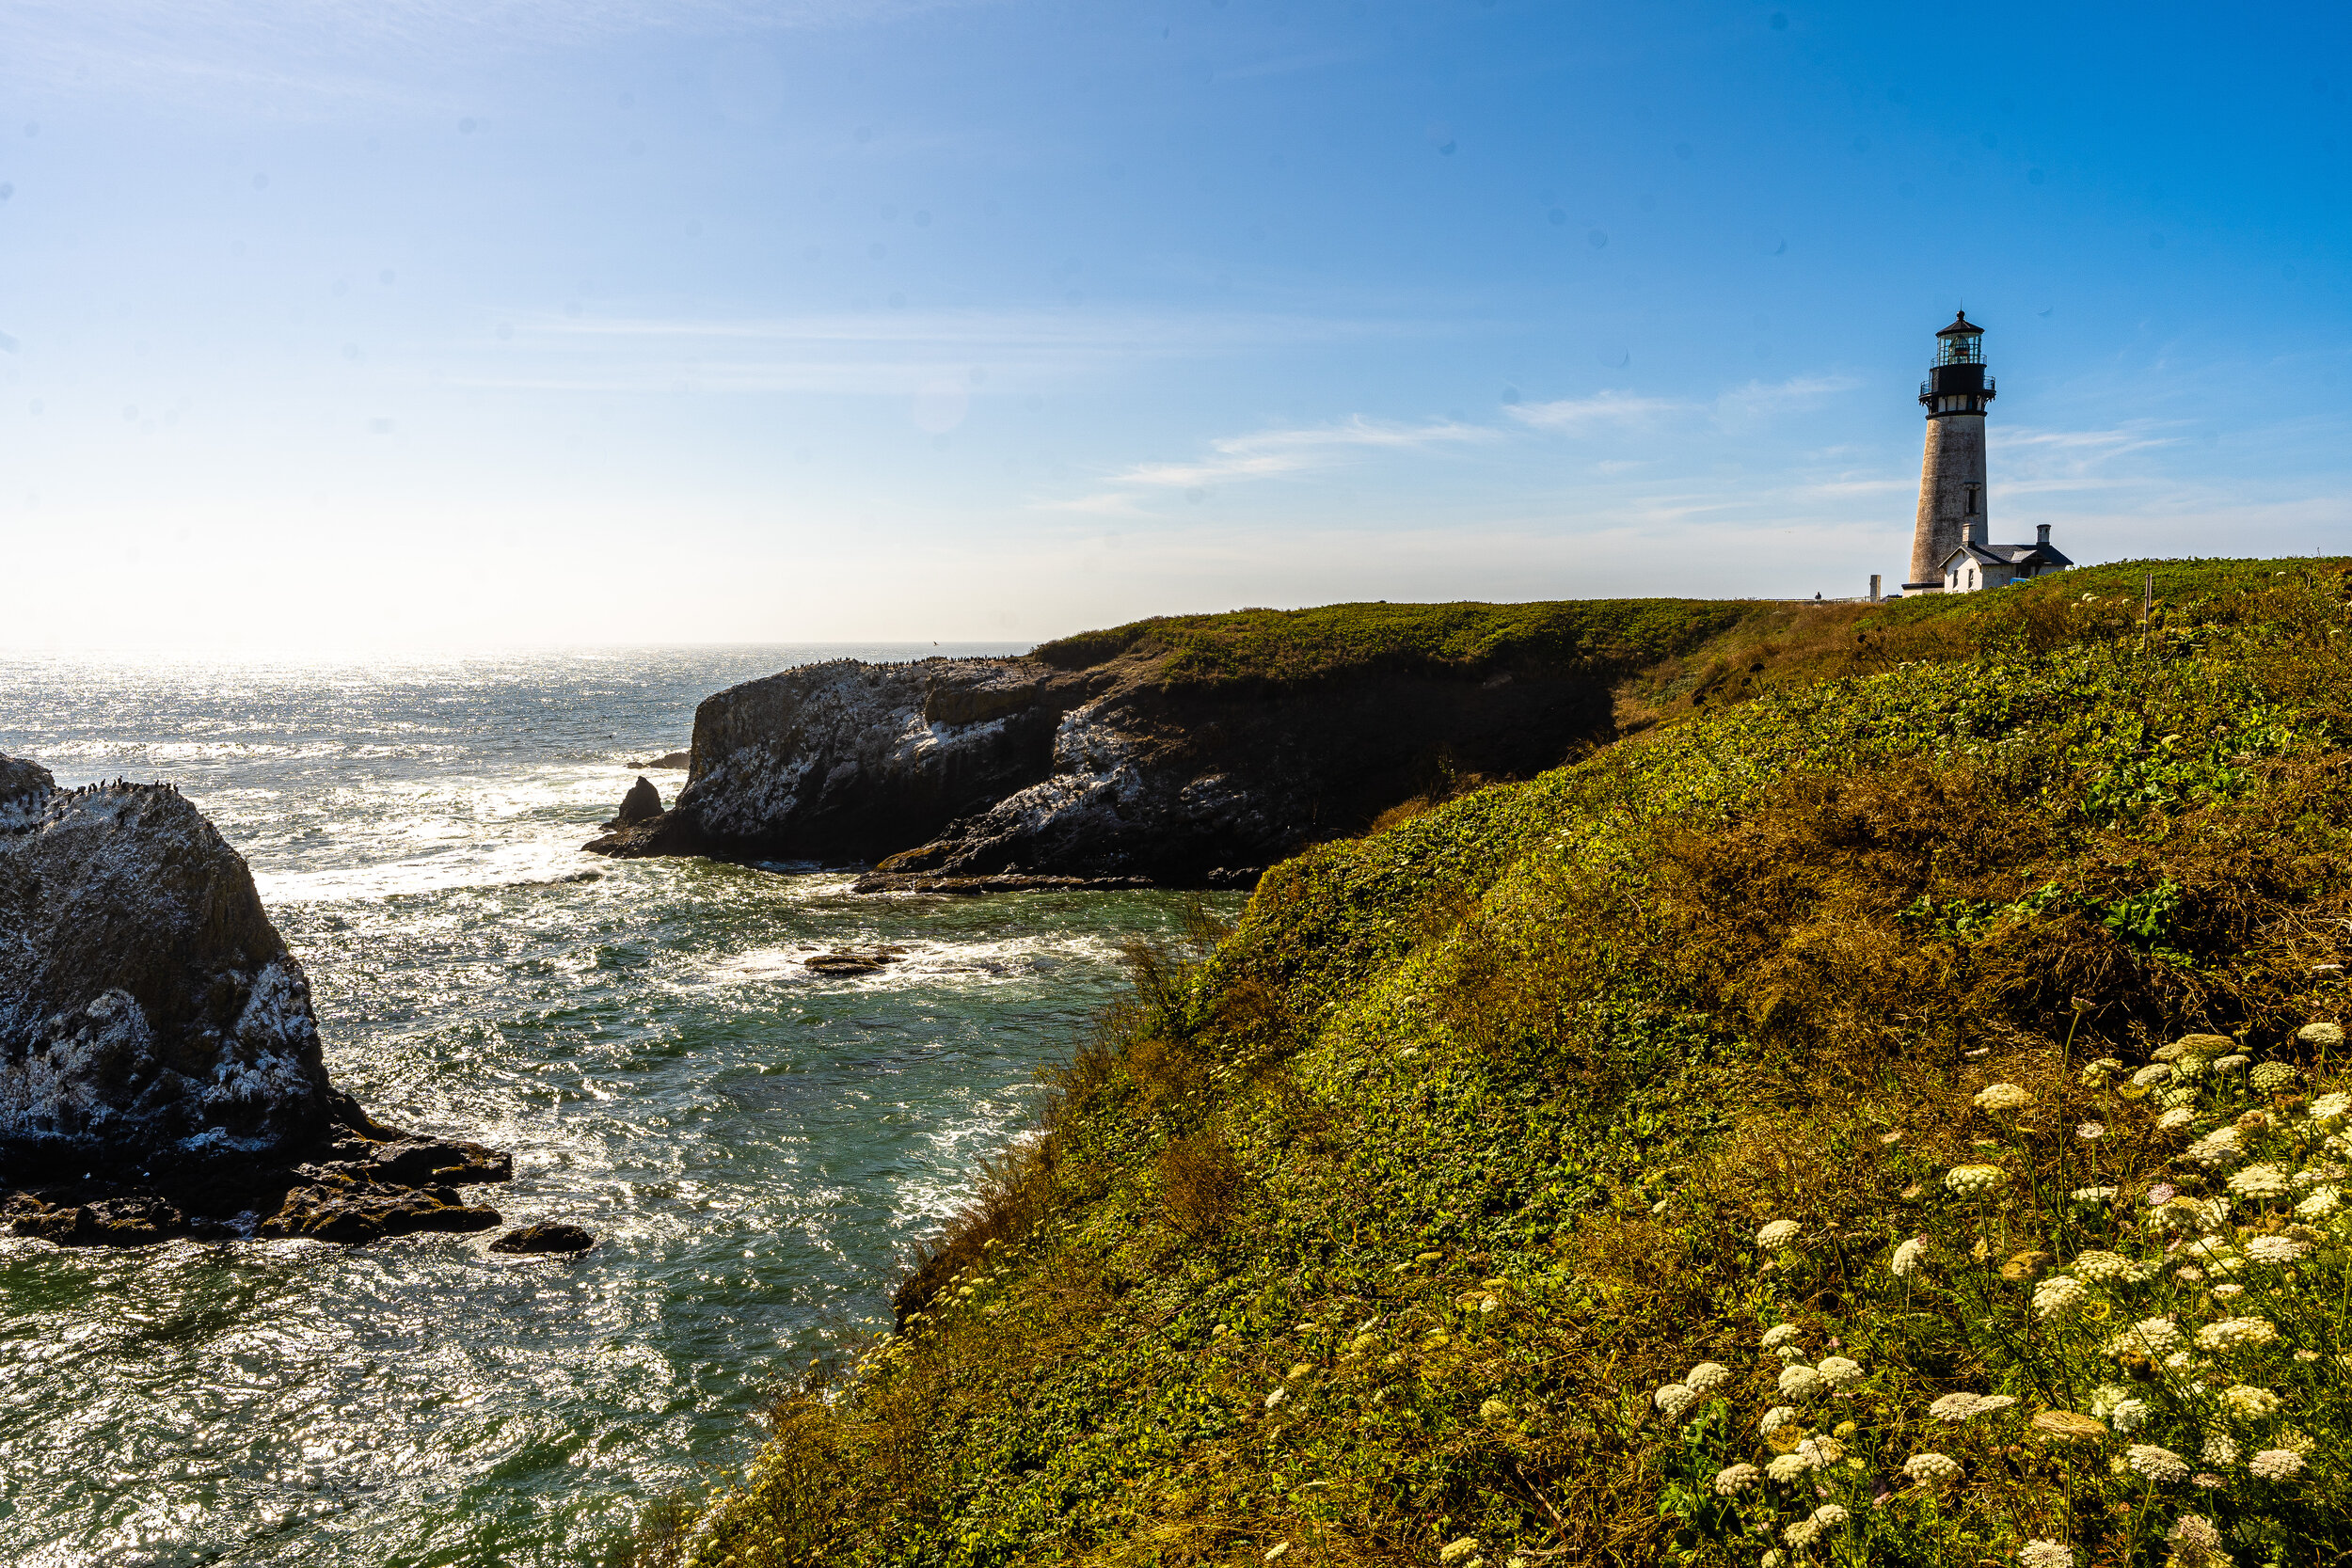   The Yaquina Head Lighthouse  in Newport is the tallest on the Oregon Coast; at 93 feet tall, it is nearly twice the height as many others. The lens of a lighthouse is responsible for optimizing the projection of light. The first Fresnel lighthouse 